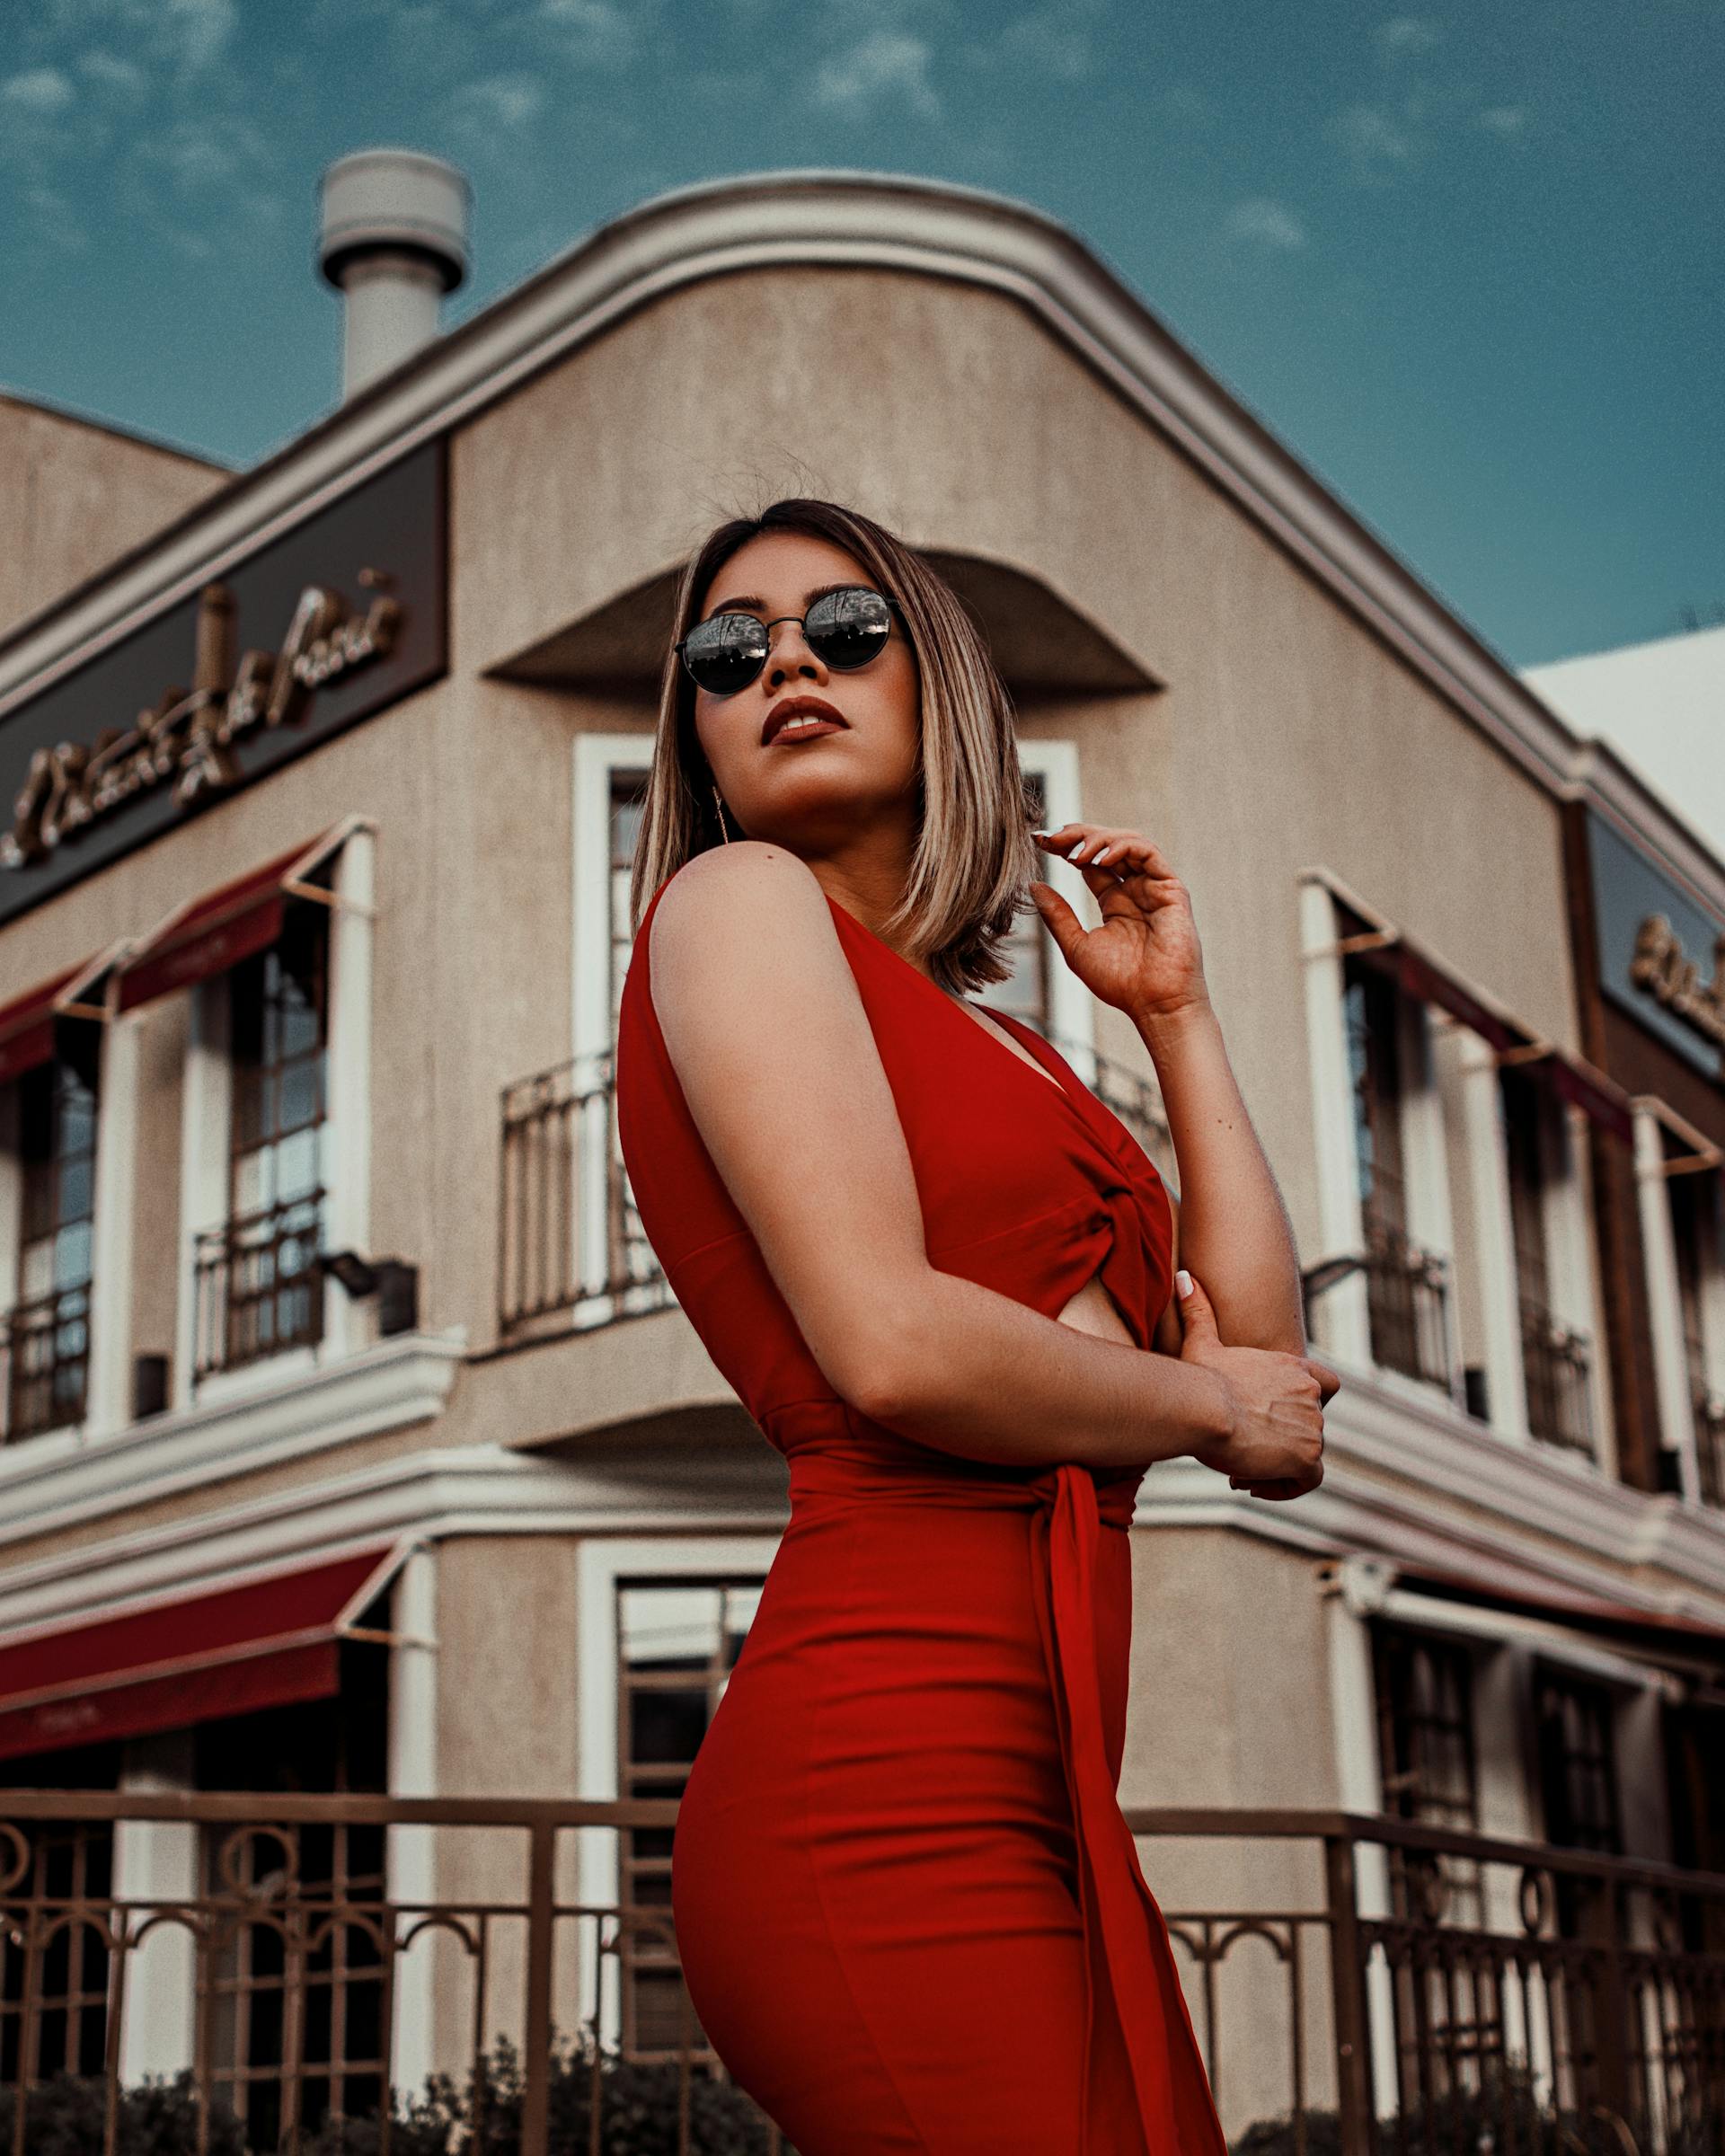 A woman in a red dress | Source: Pexels